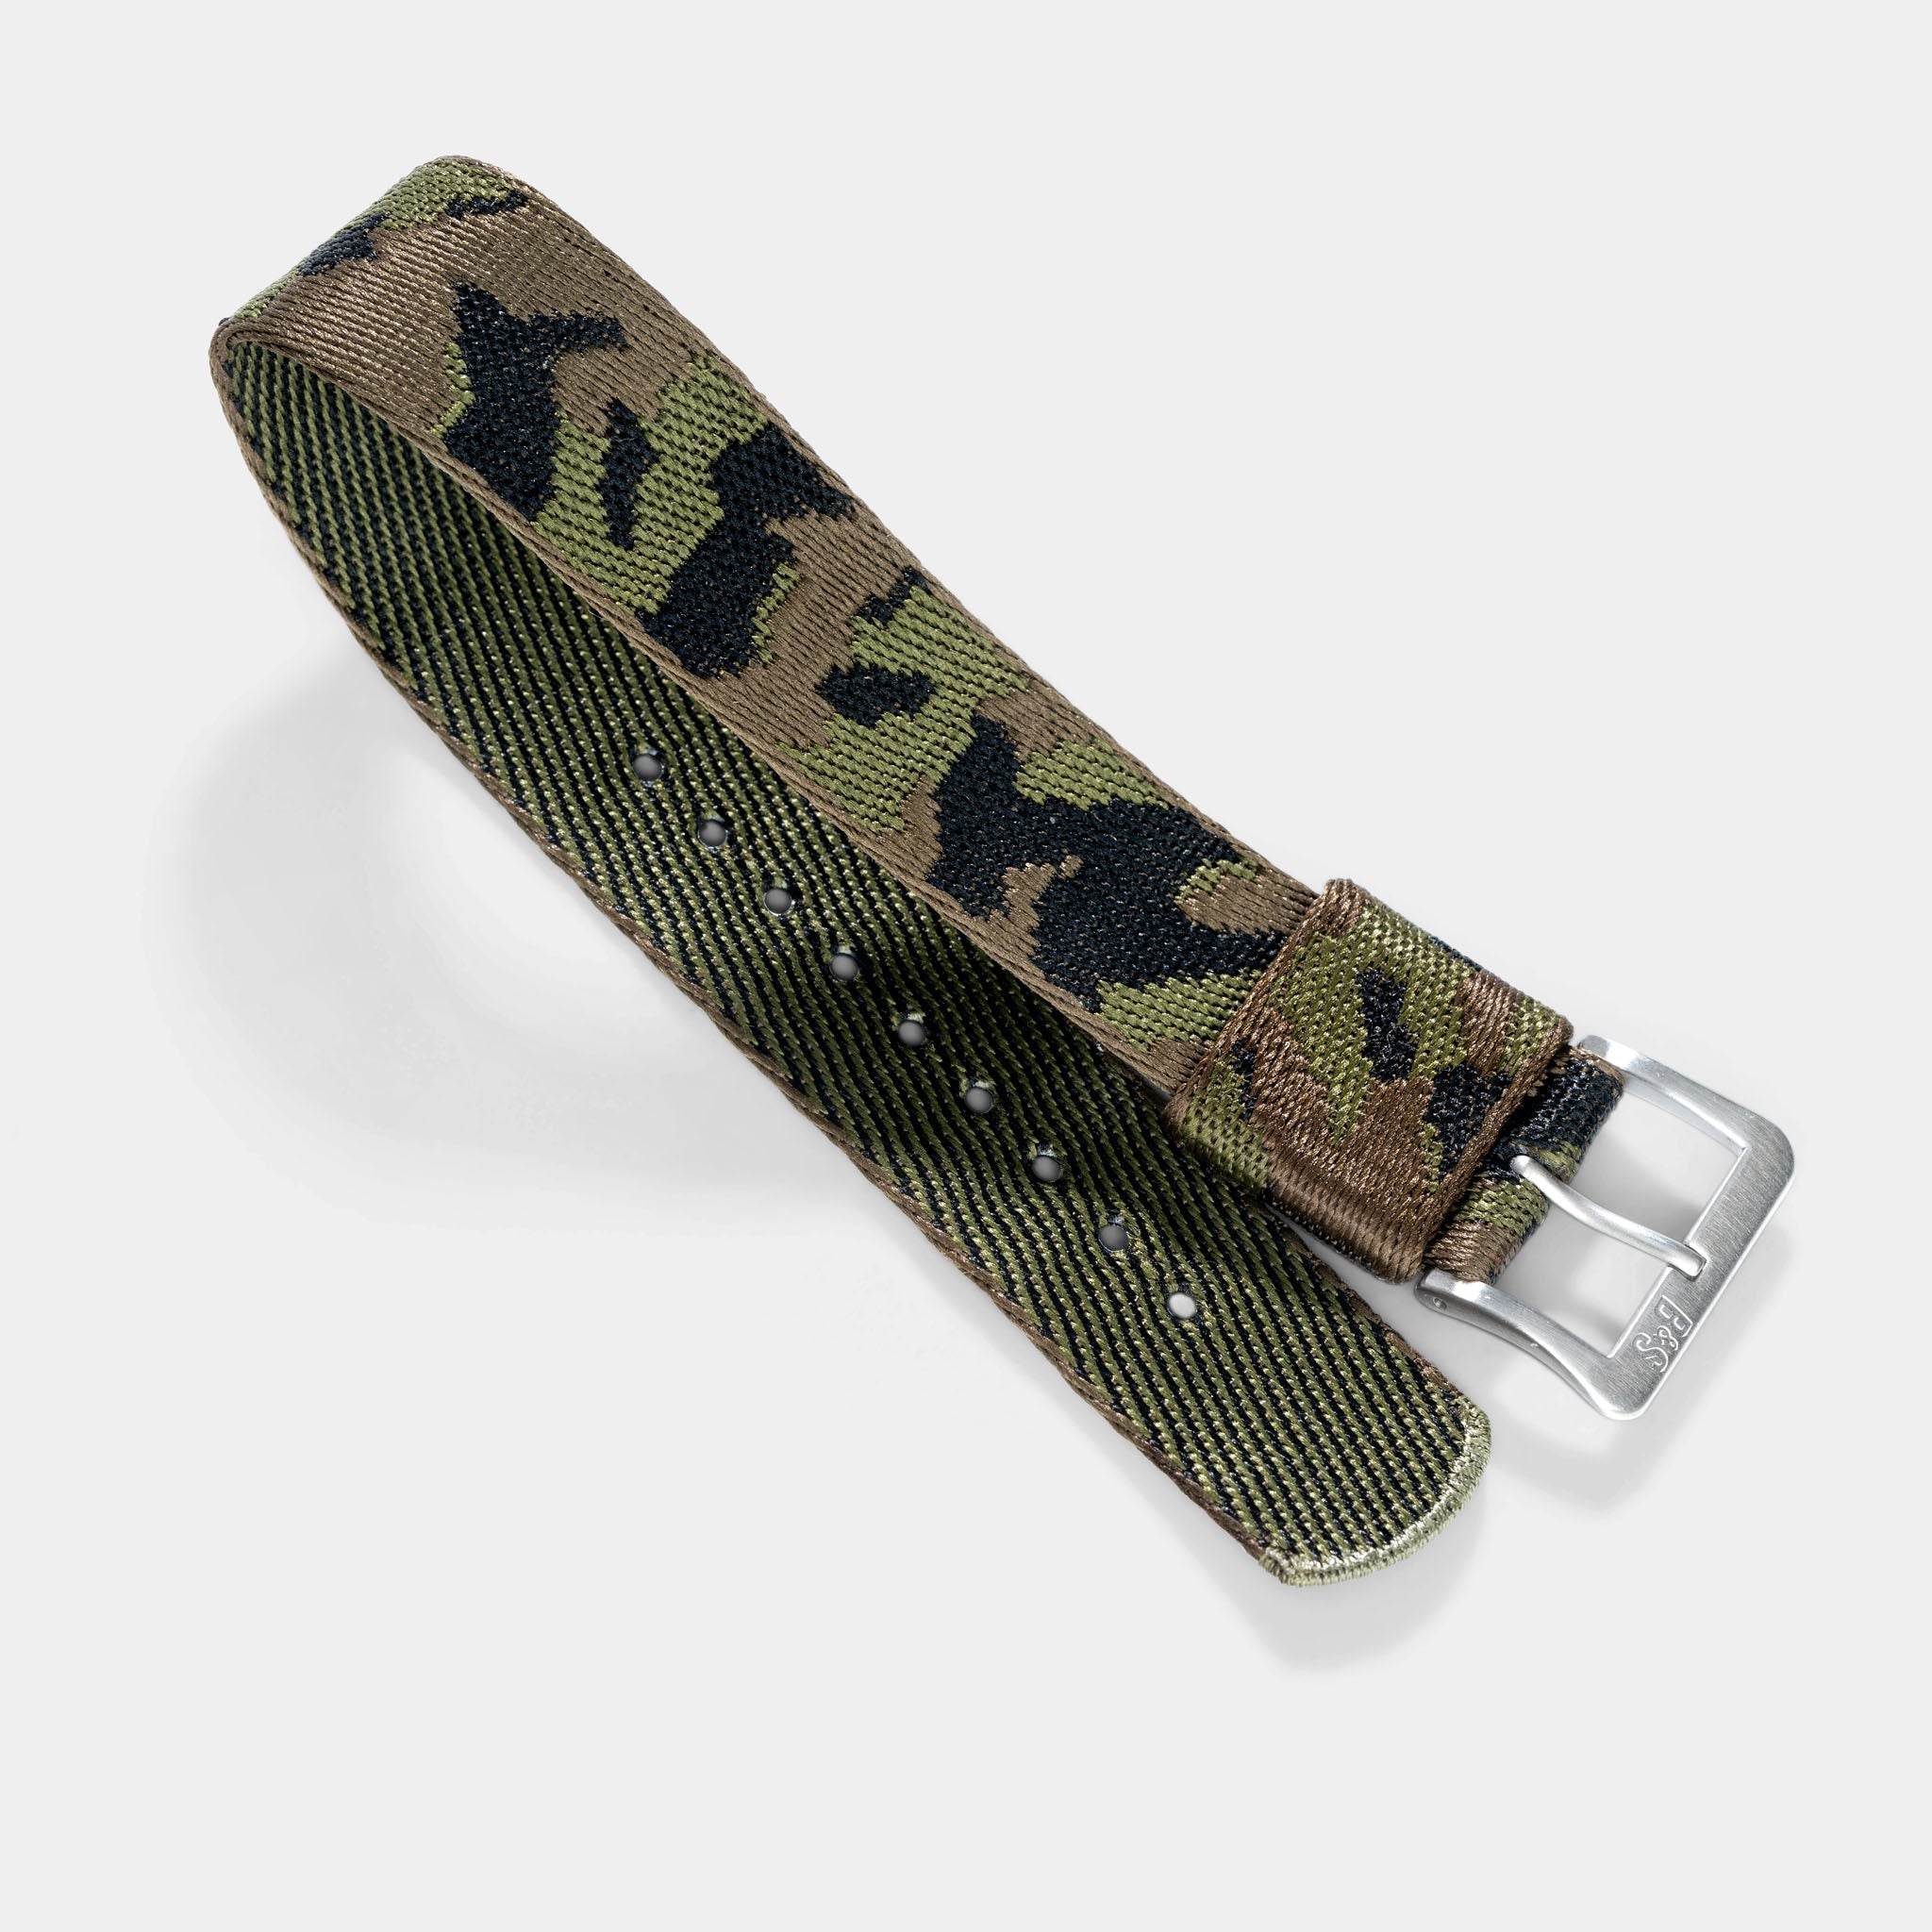 green_Camo_Jacquard_Nato_Watch_Strap_For_Luxury_Sport_Watches